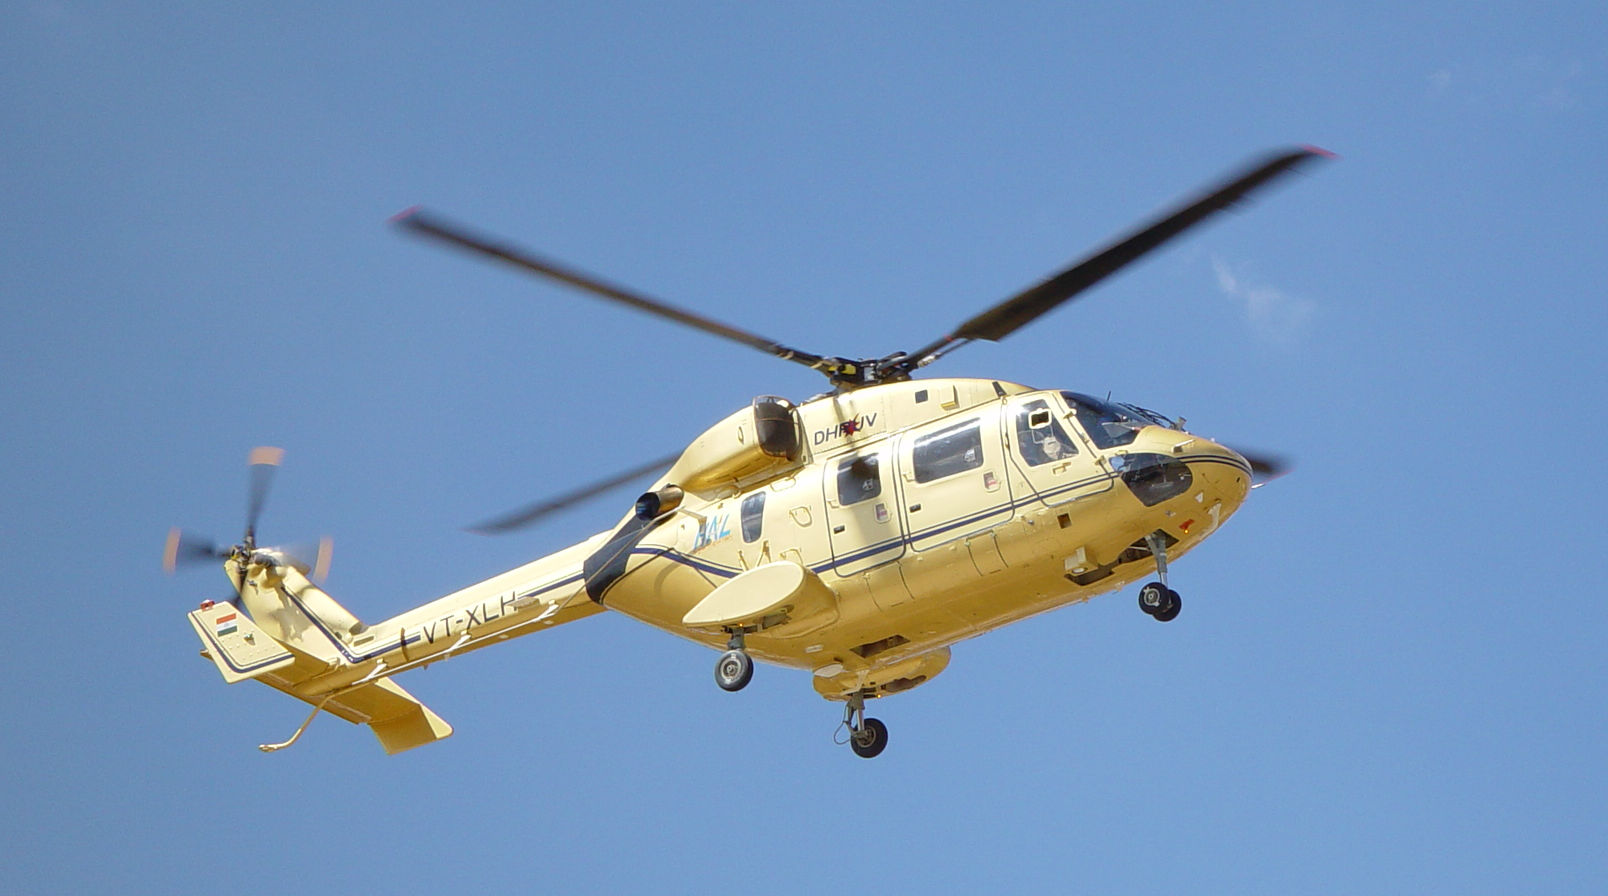 he ALH Dhruv civil helicopter can be used for short distance passenger transport, VIP travel, search-and-rescue, emergency medical service, underslung load, disaster relief, as well as offshore operations in varying and challenging geographical terrains. HAL Photo